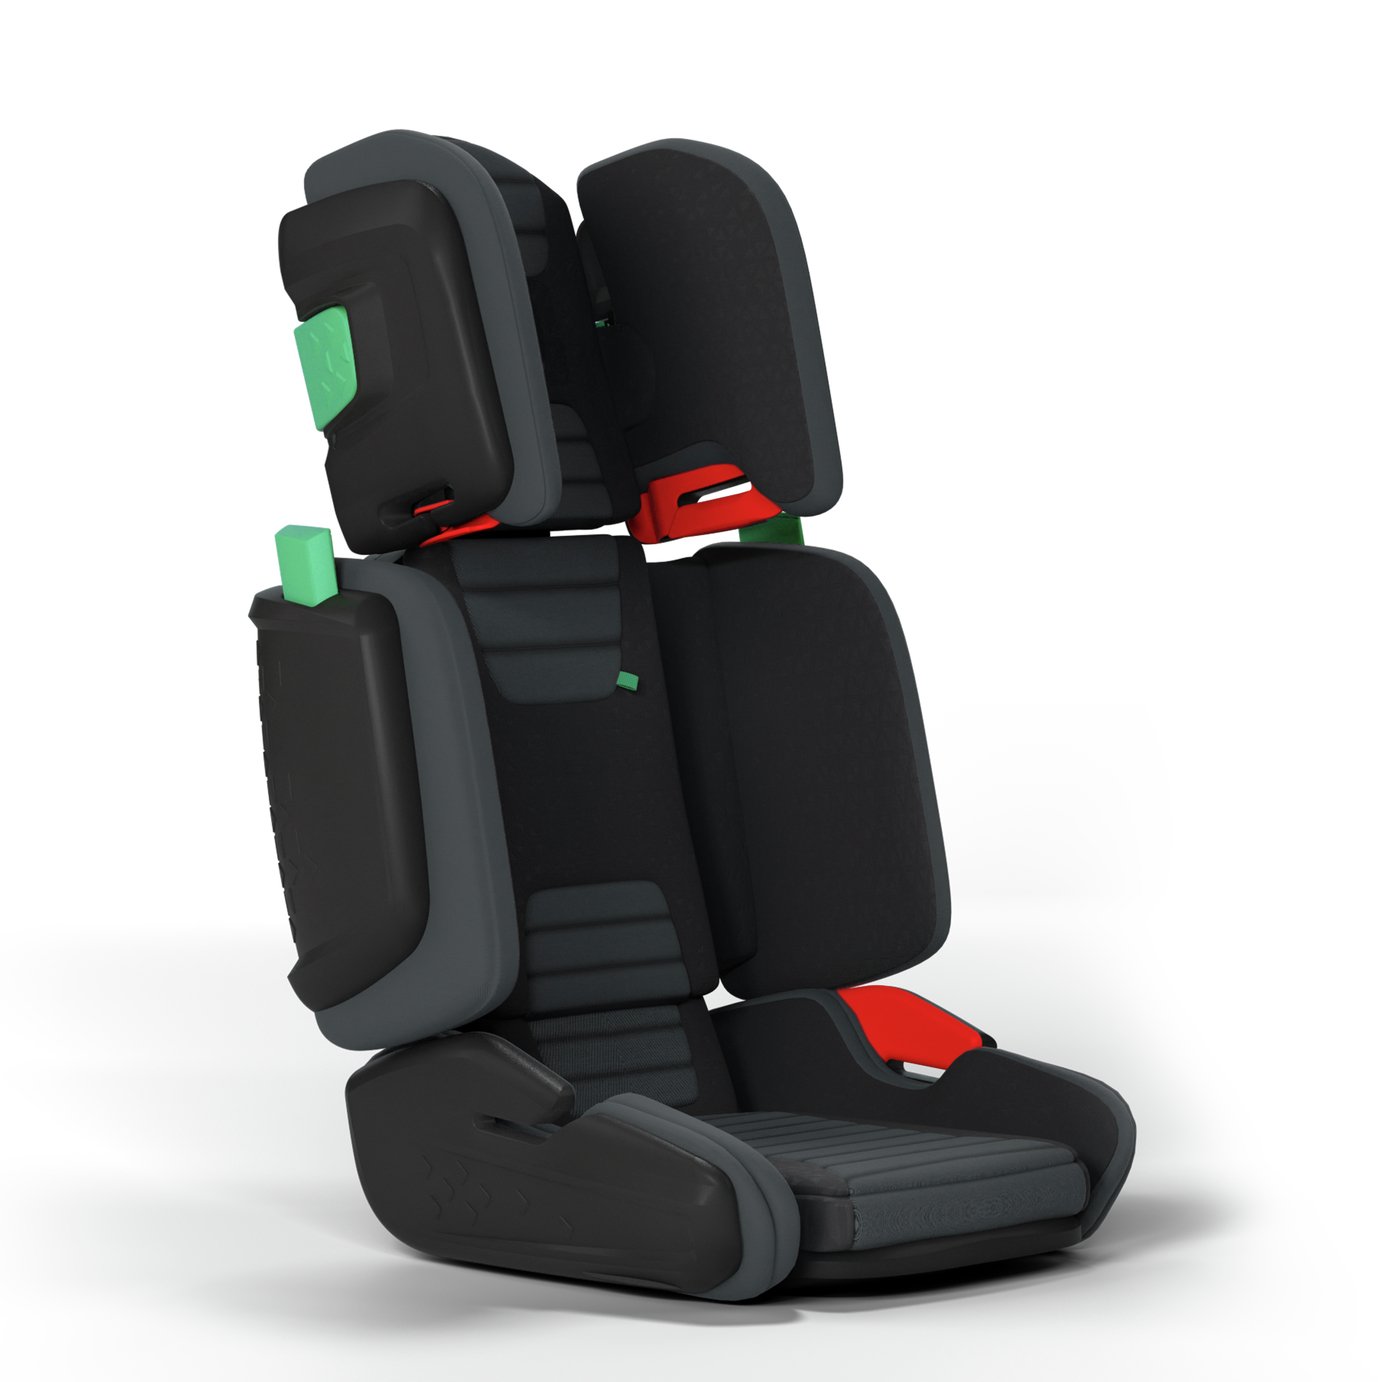 HiFold Fit and Fold High Back Group 2/3 Booster Seat Review